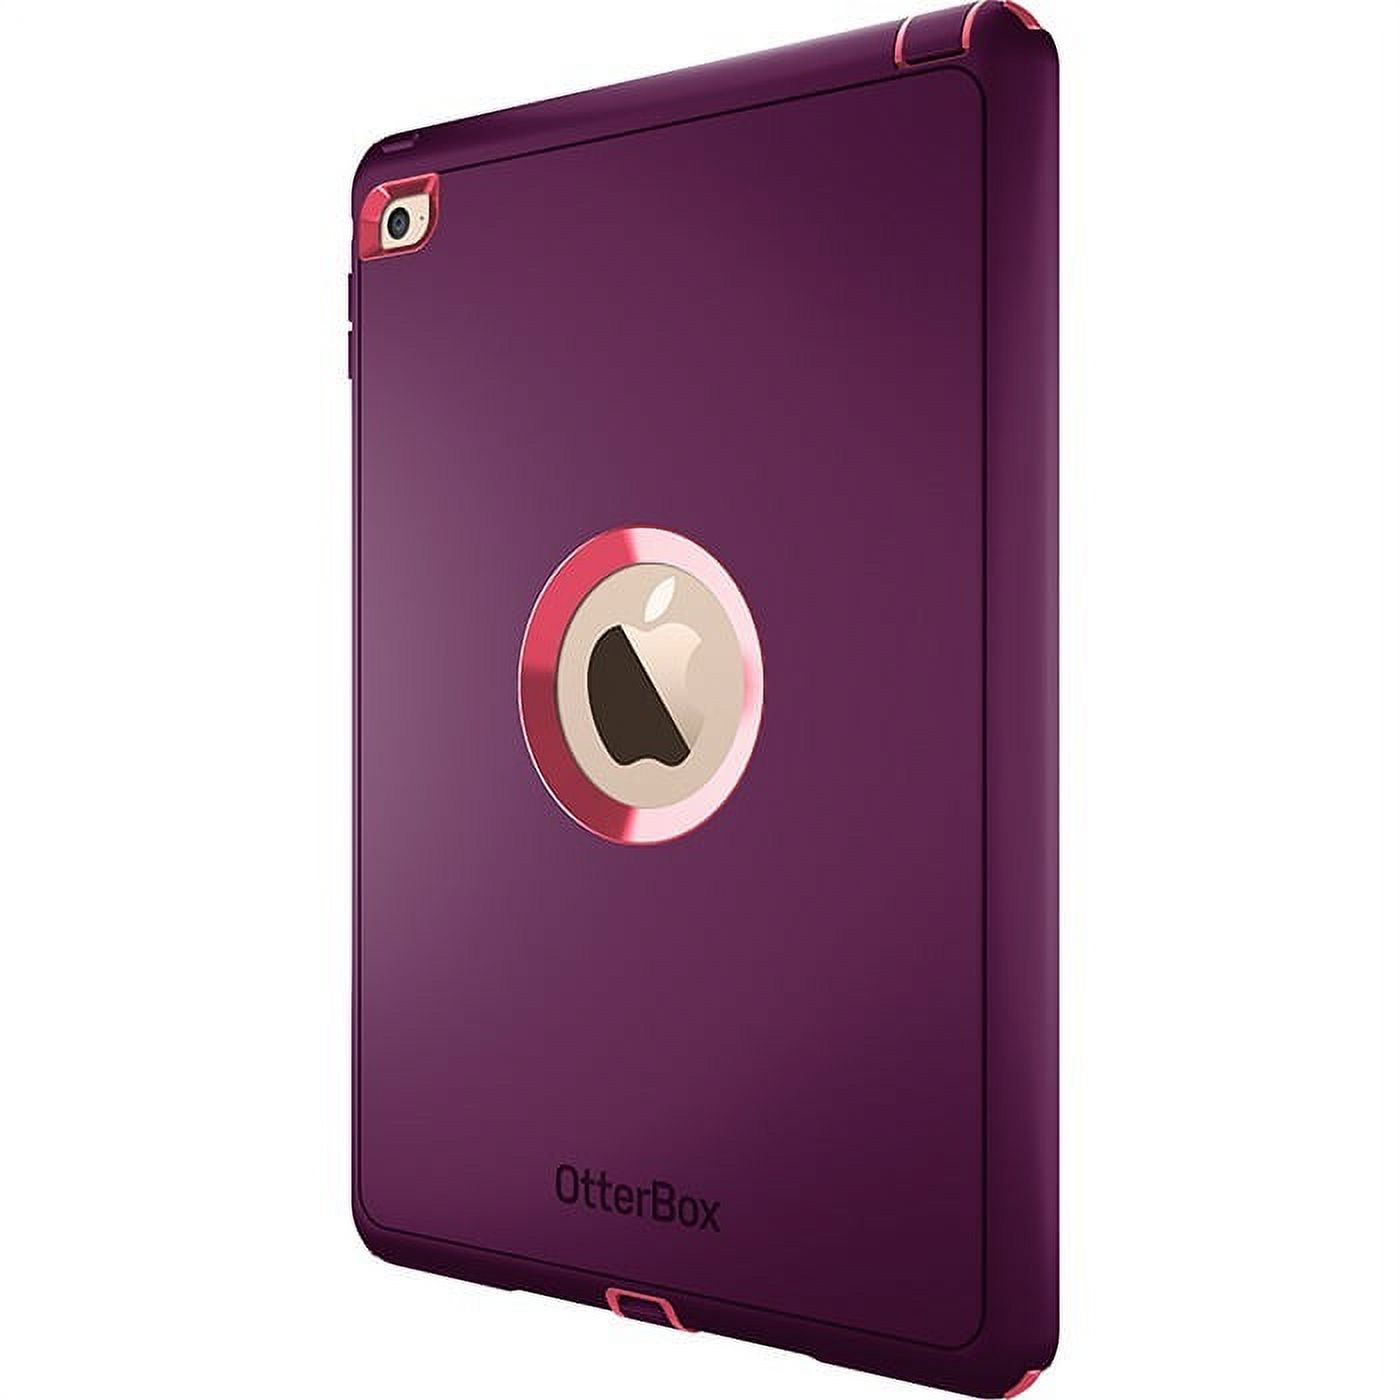 OtterBox Defender Series Case for iPad Air 2 - image 3 of 6